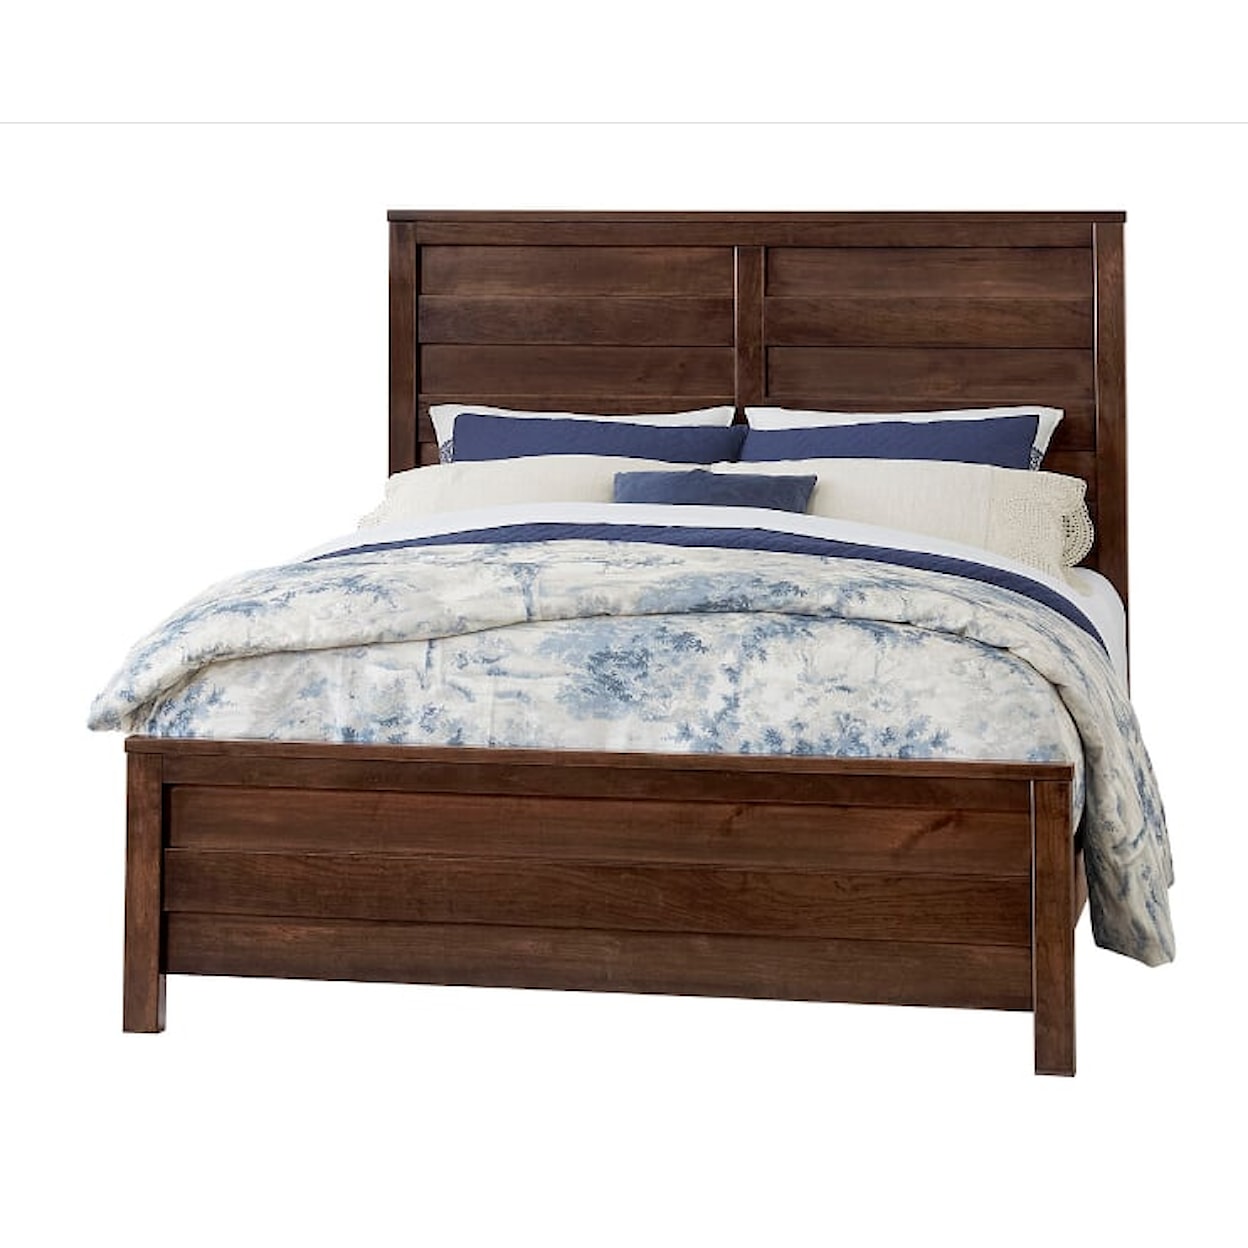 Vaughan Bassett 817-Lancaster County-Amish Walnut Queen Casual Bed